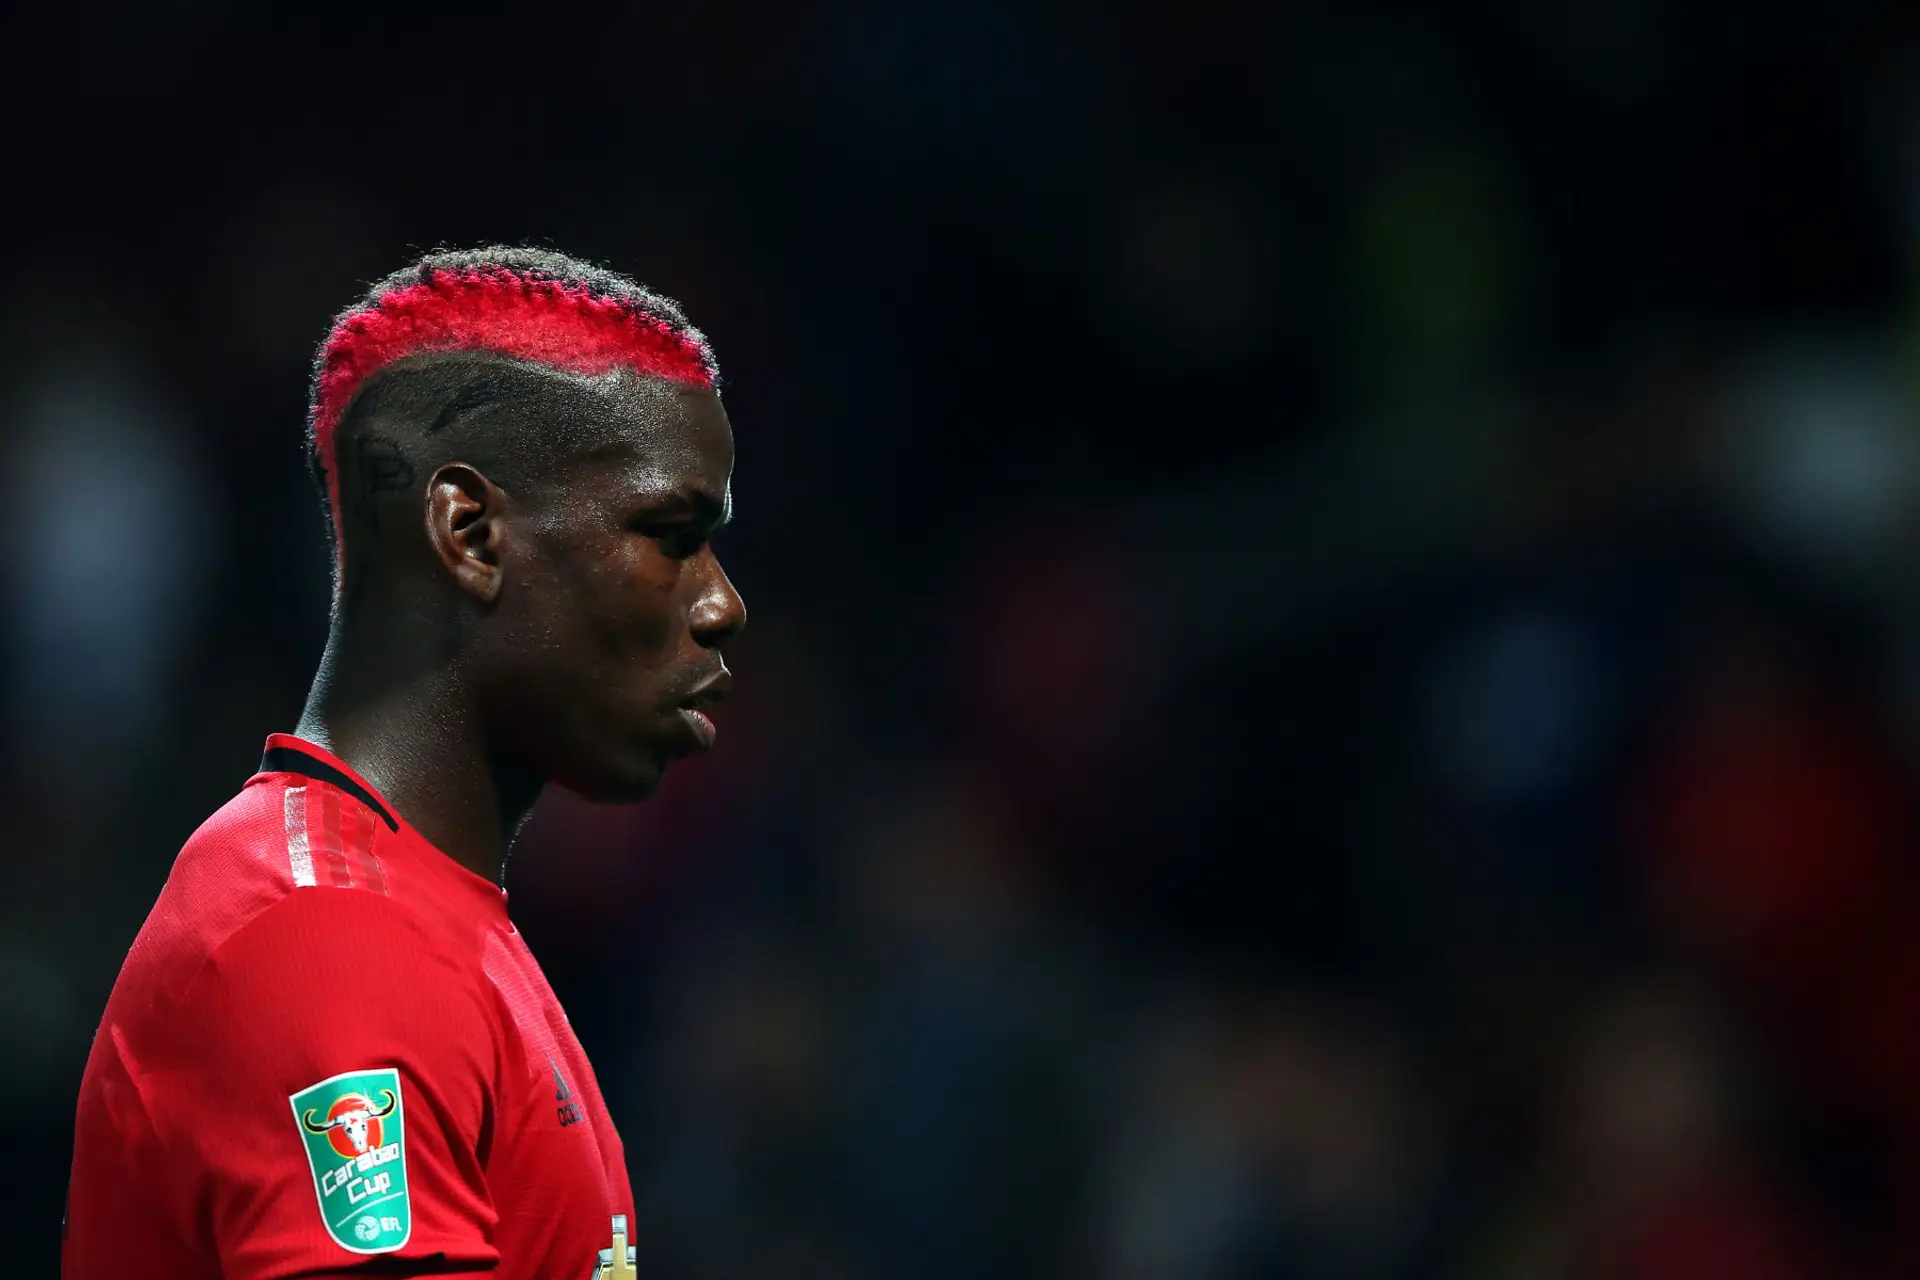 Pogba is a parasite who needs to leave